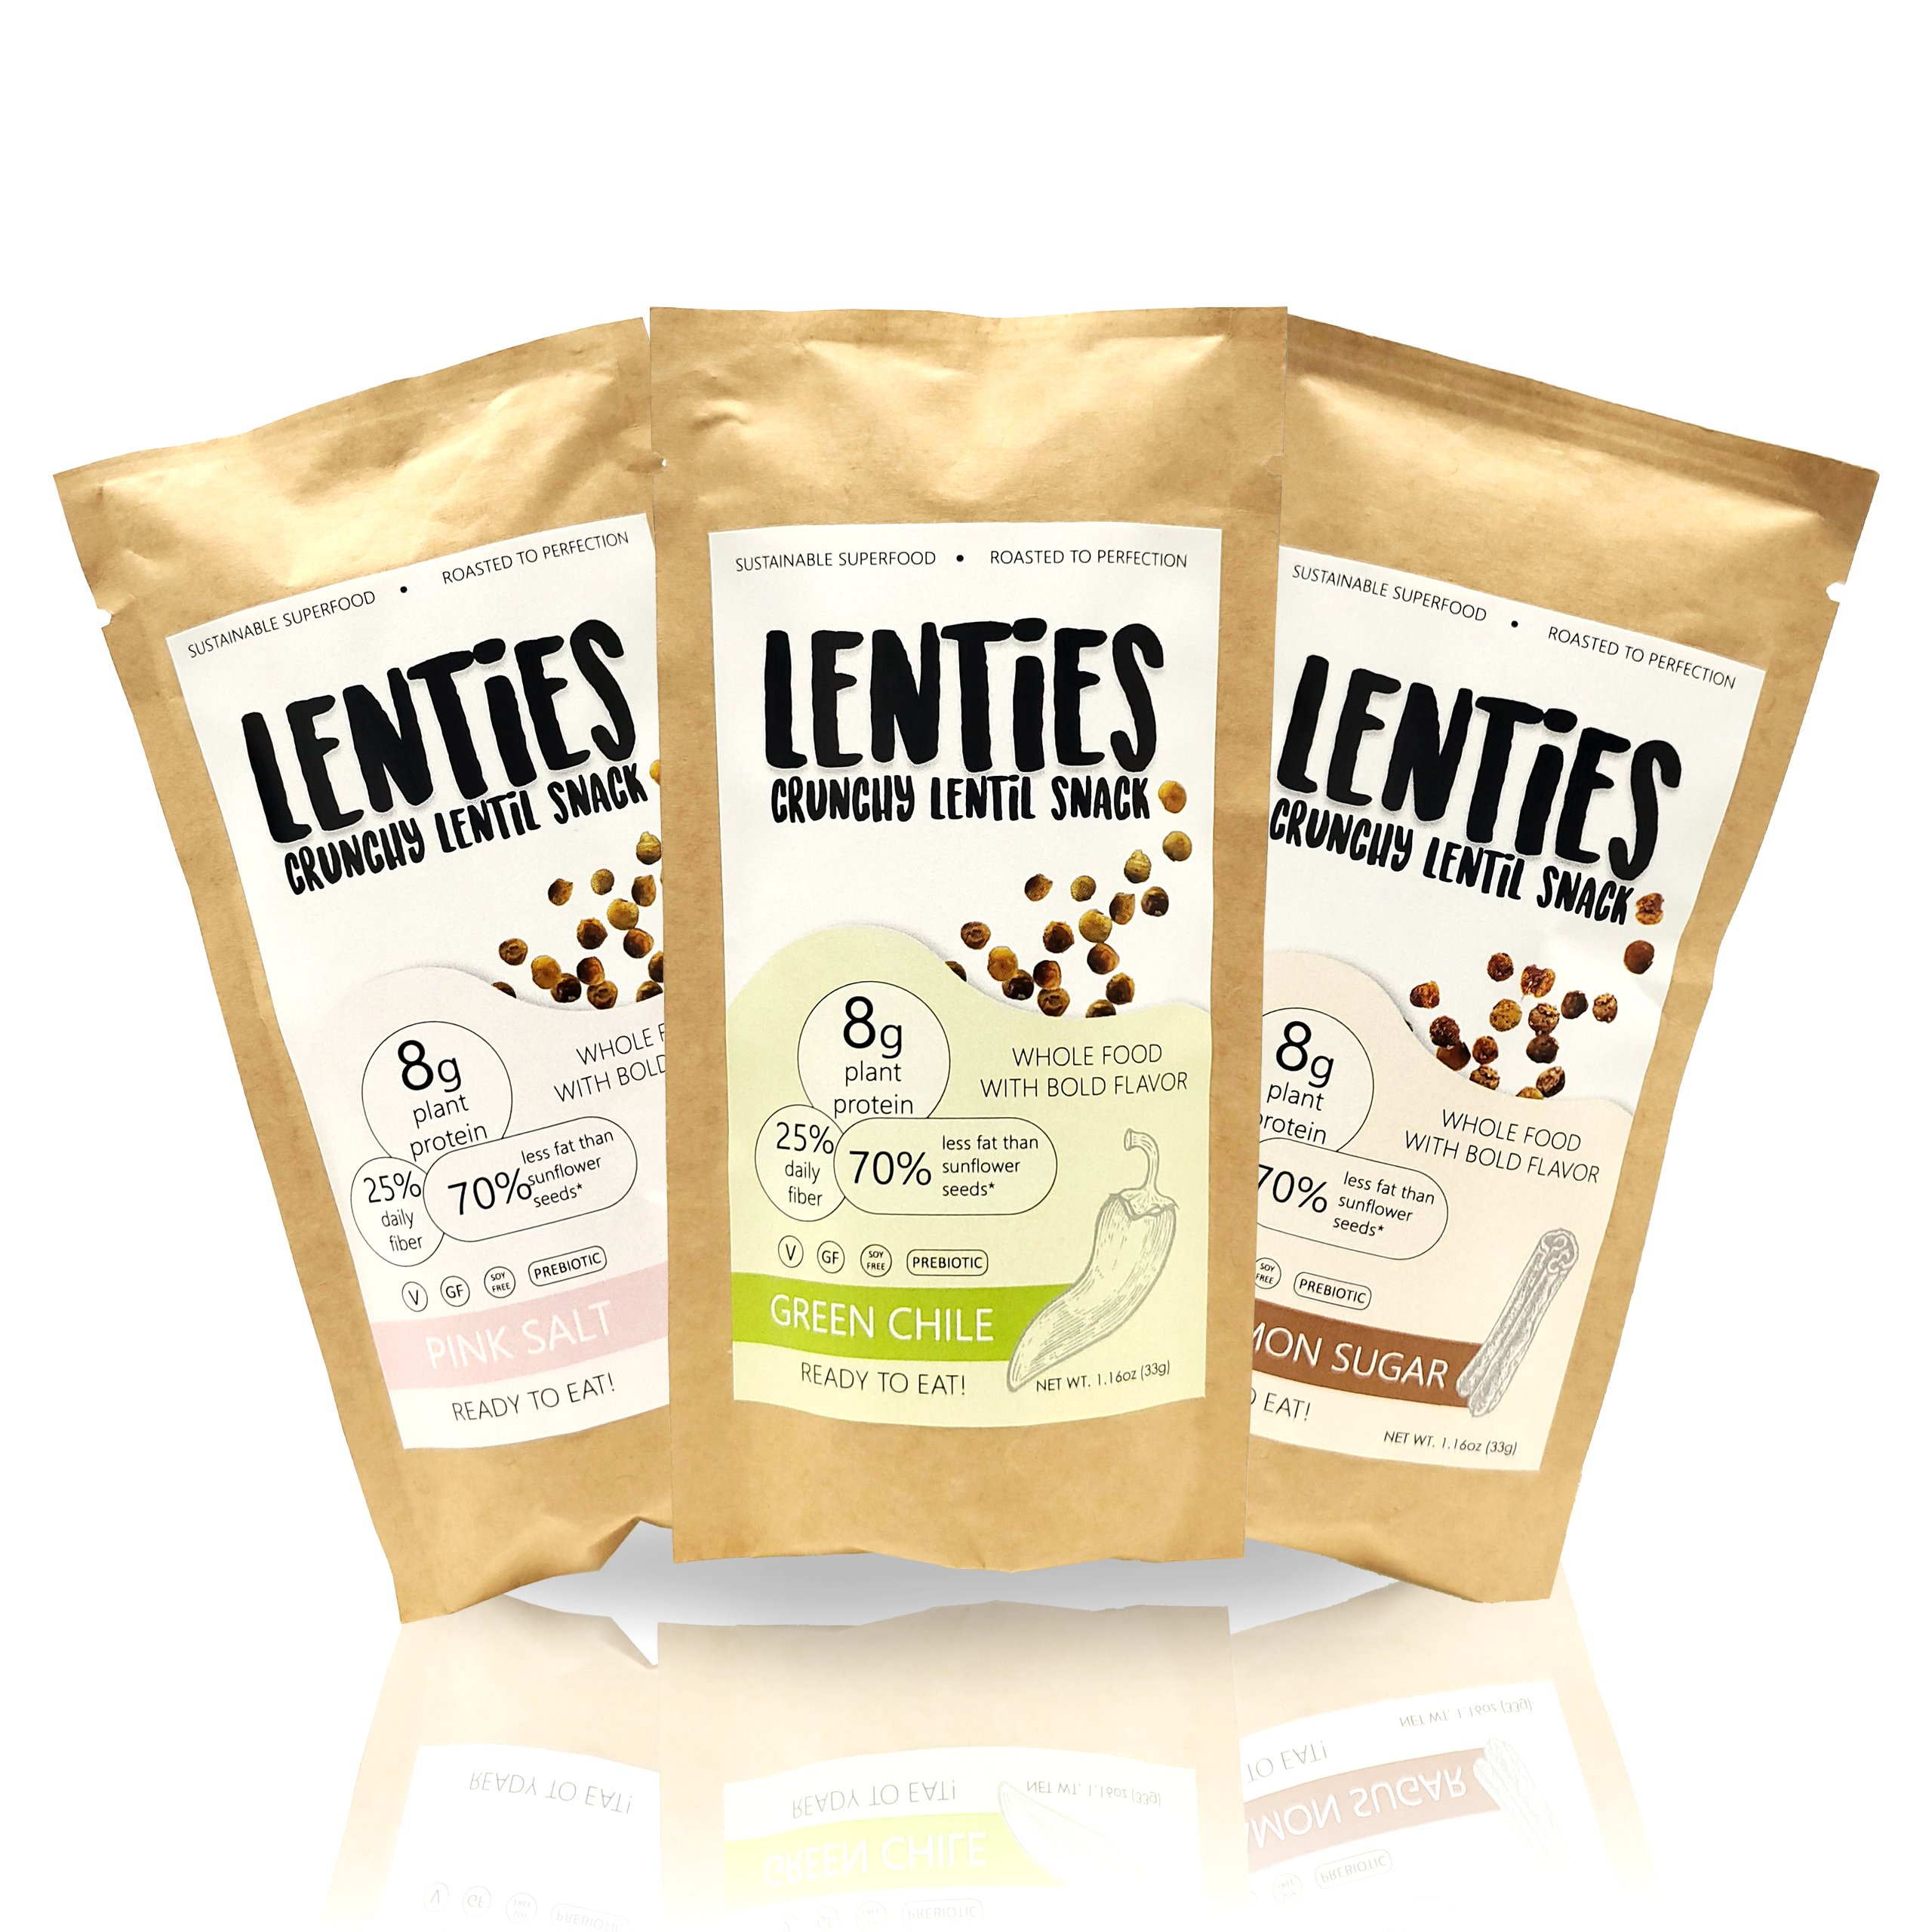 6-Pack of Lenties Crunchy Lentil Snacks, T-Shirt, and Bumper Sticker Giveaway